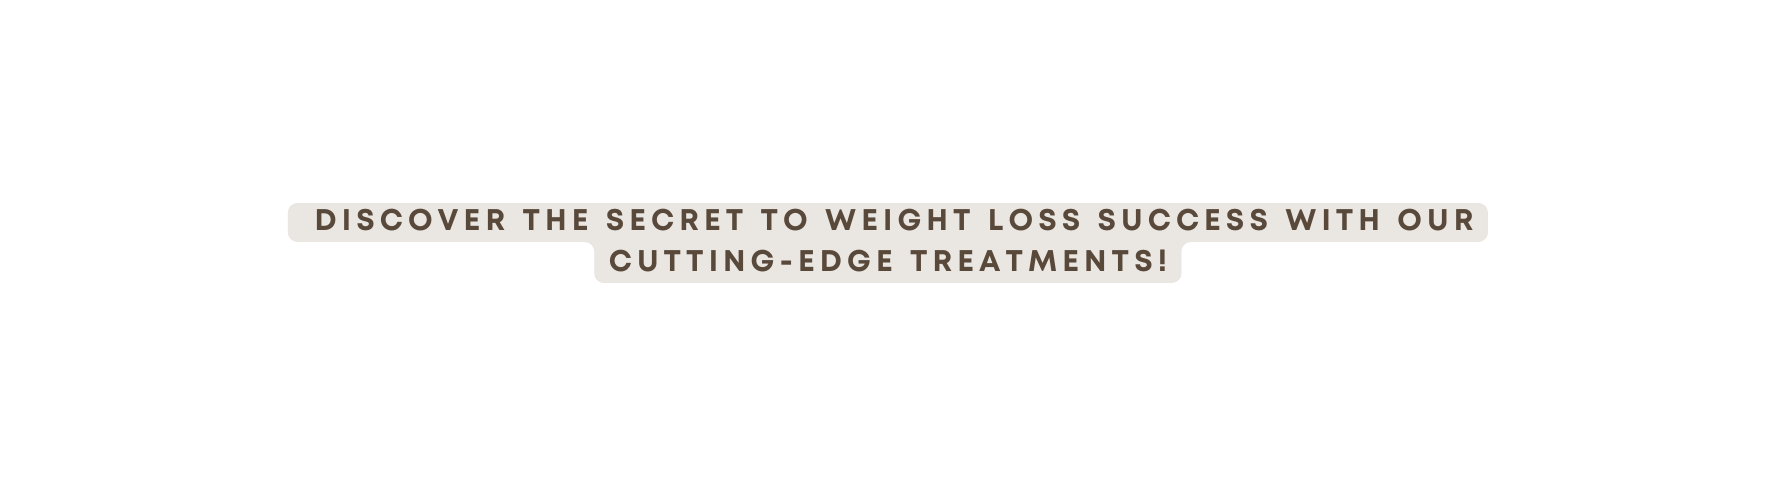 discover the secret to weight loss success with our cutting edge treatments